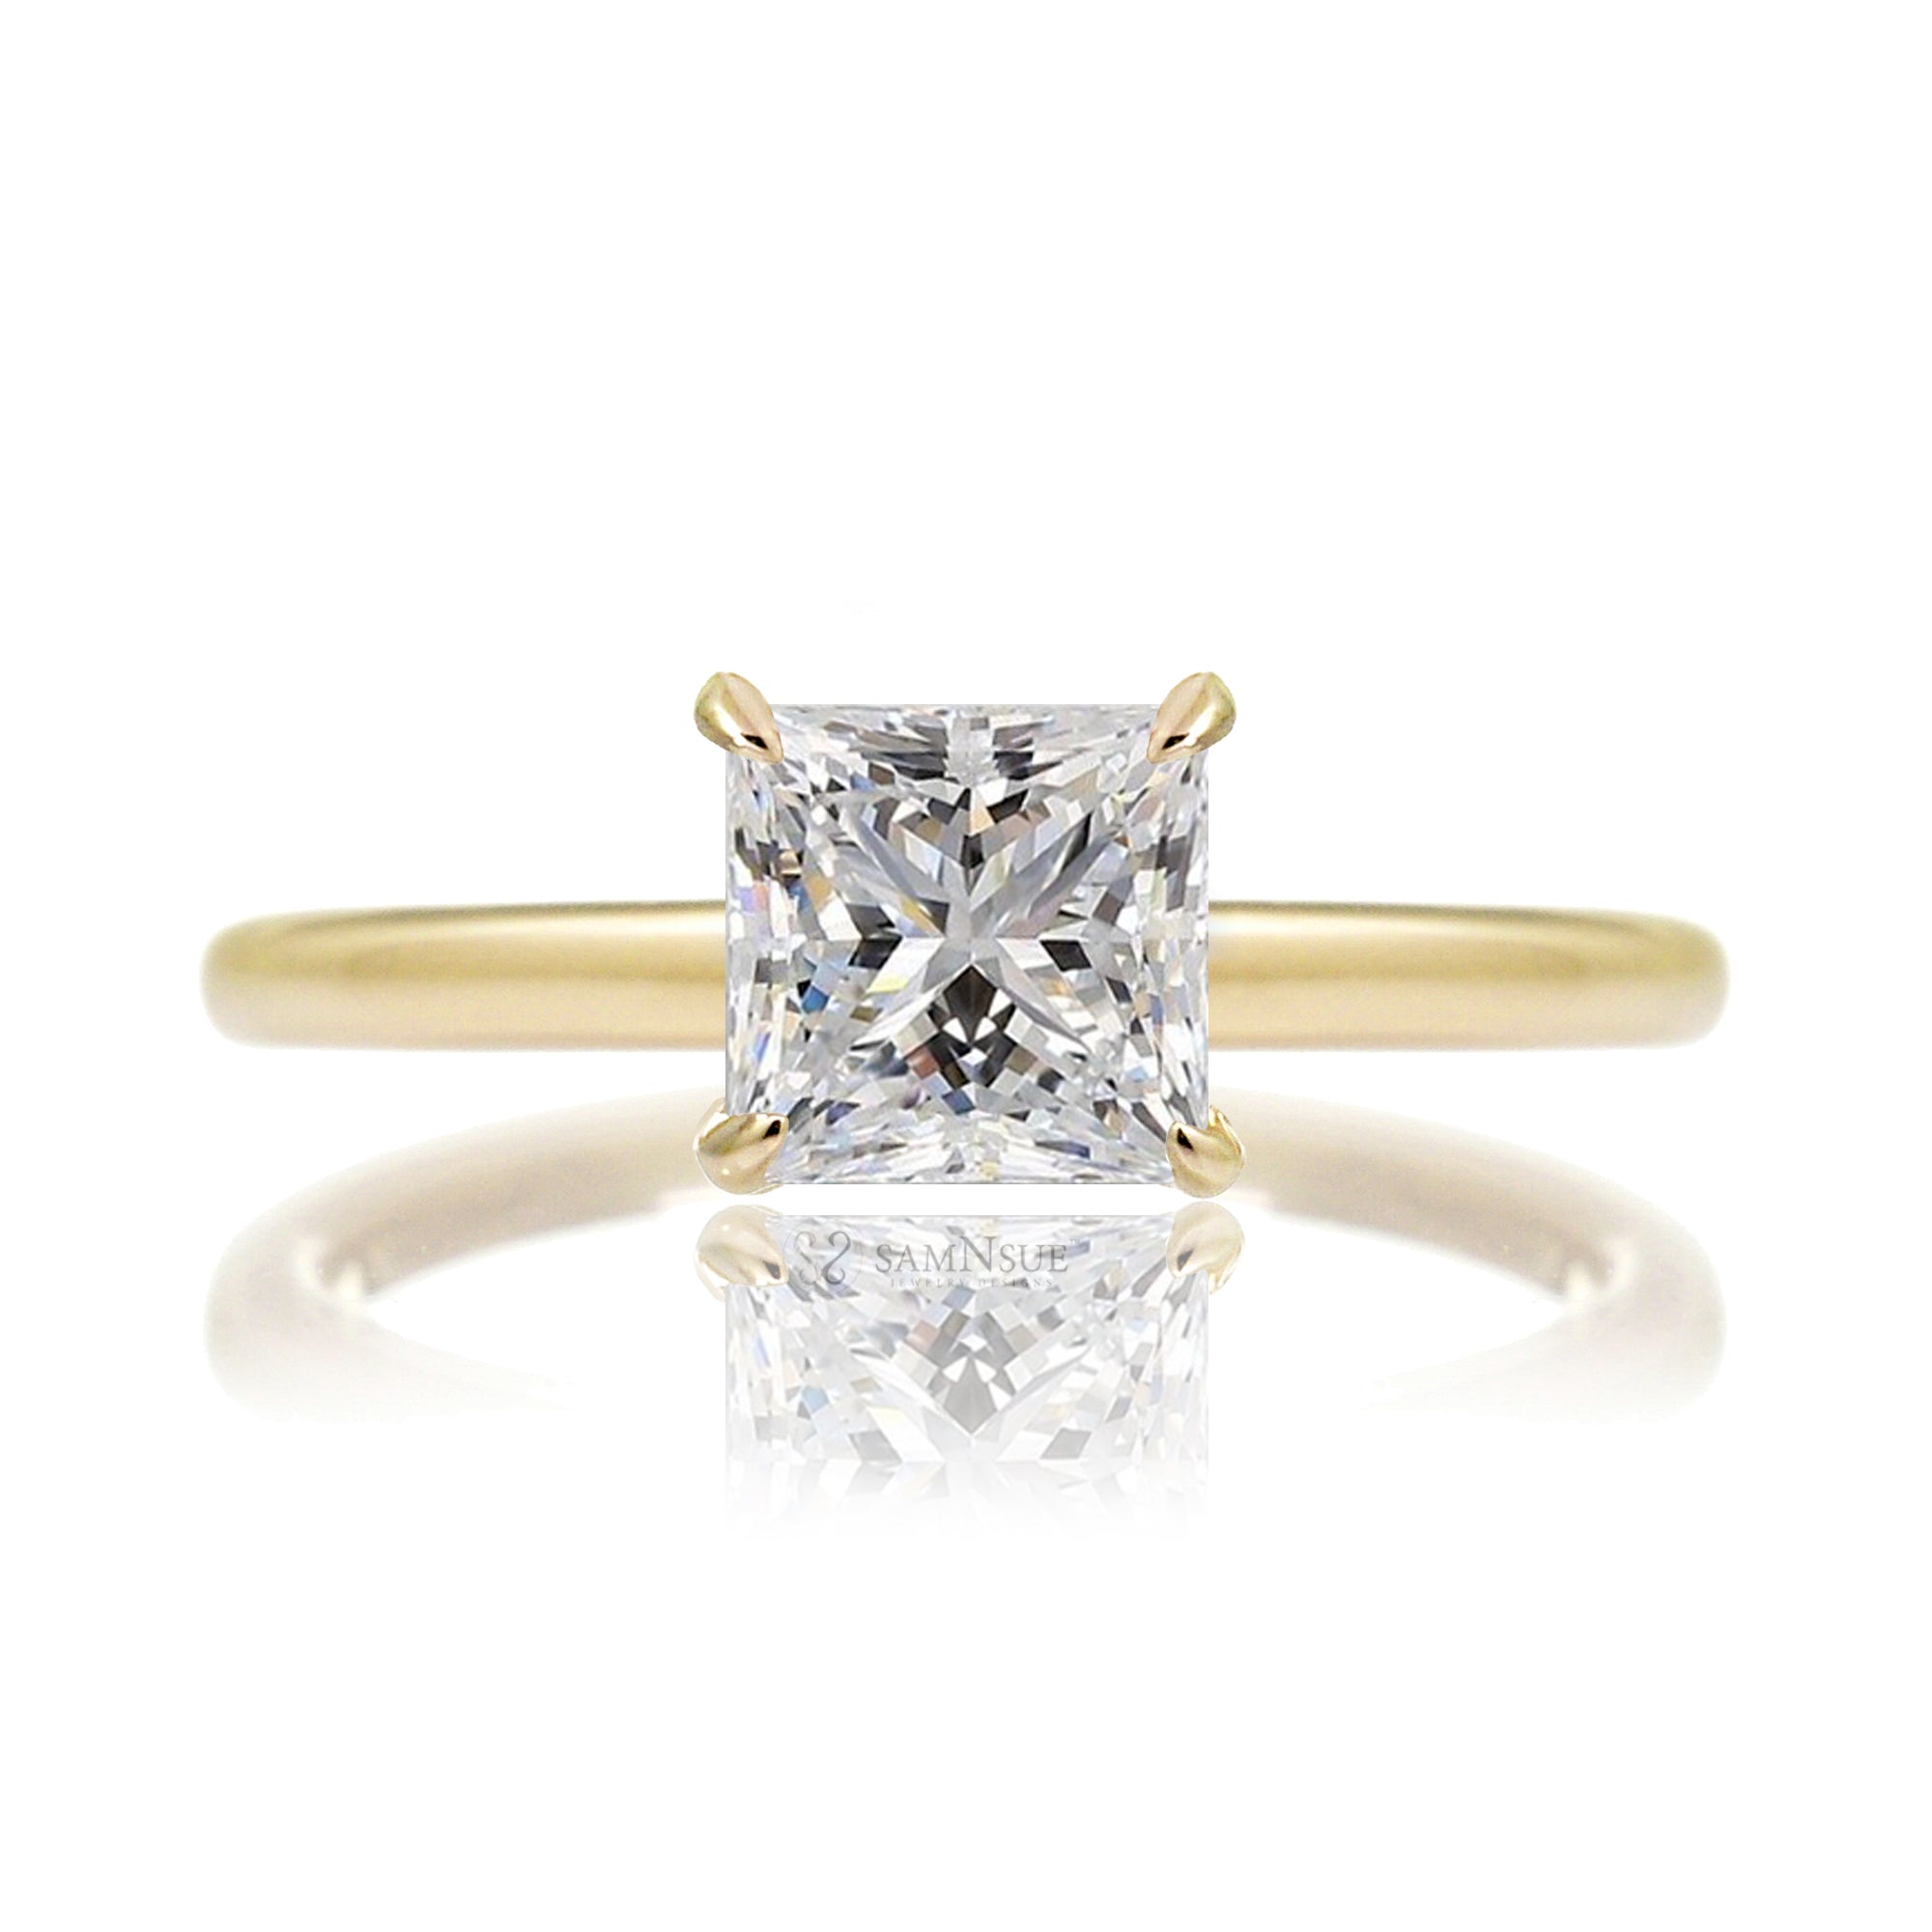 Princess cut solitaire diamond engagement ring with a hidden halo and solid polished band in yellow gold